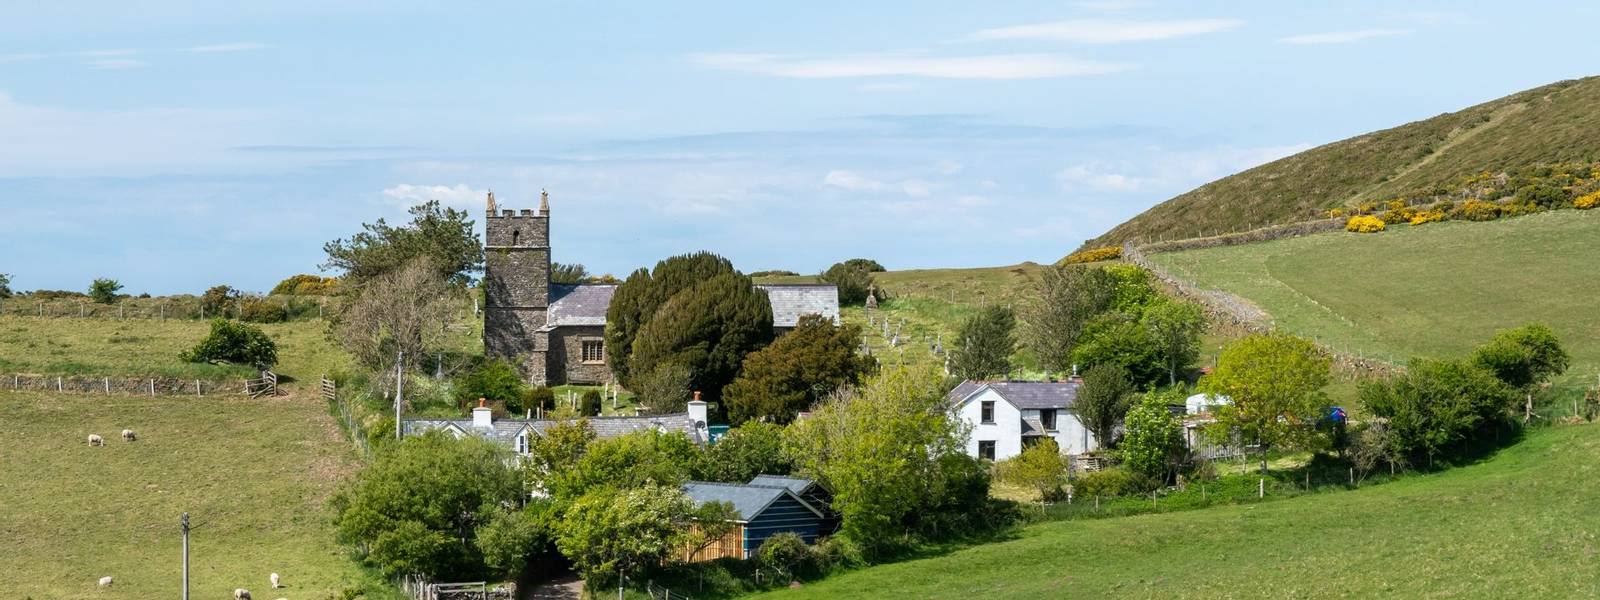 St John the Evangelist church at the top of Countisbury Hill in Devon